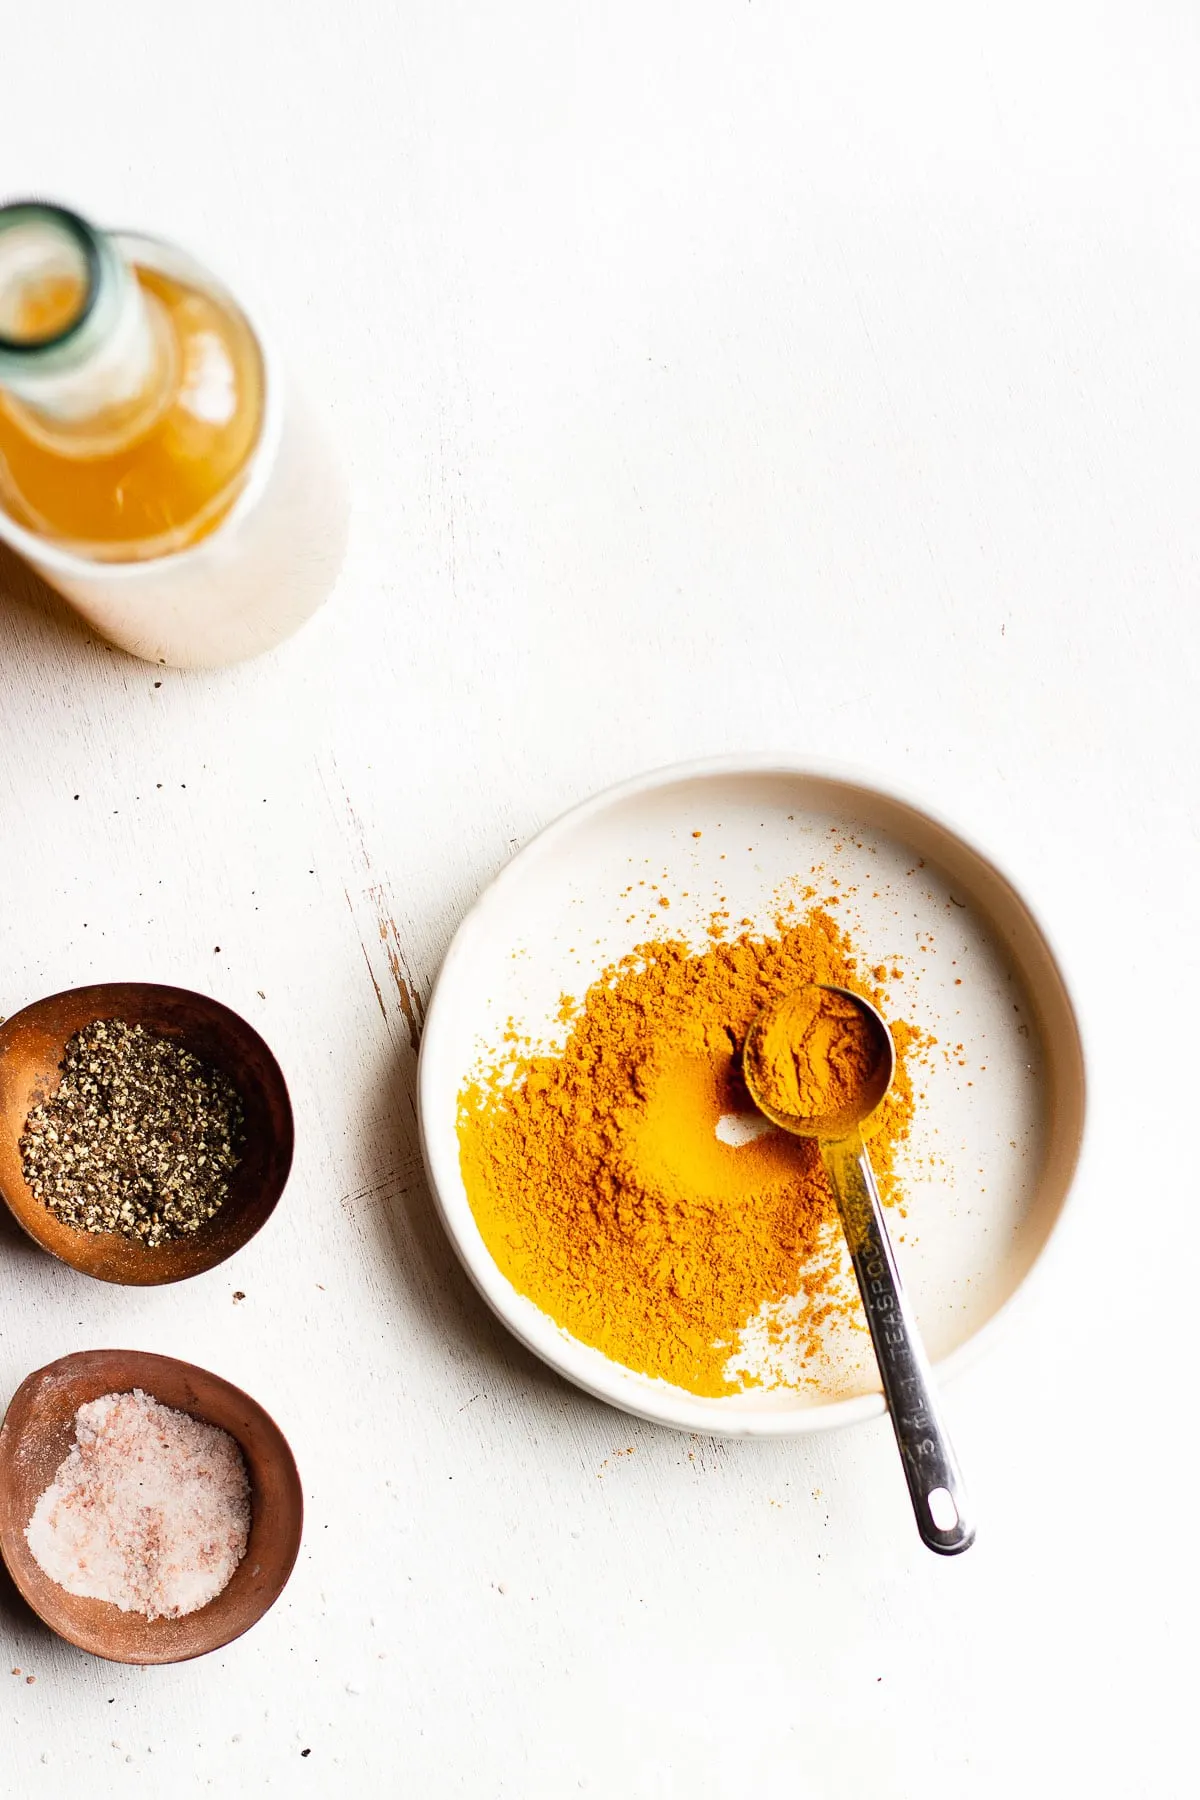 turmeric and black pepper spices